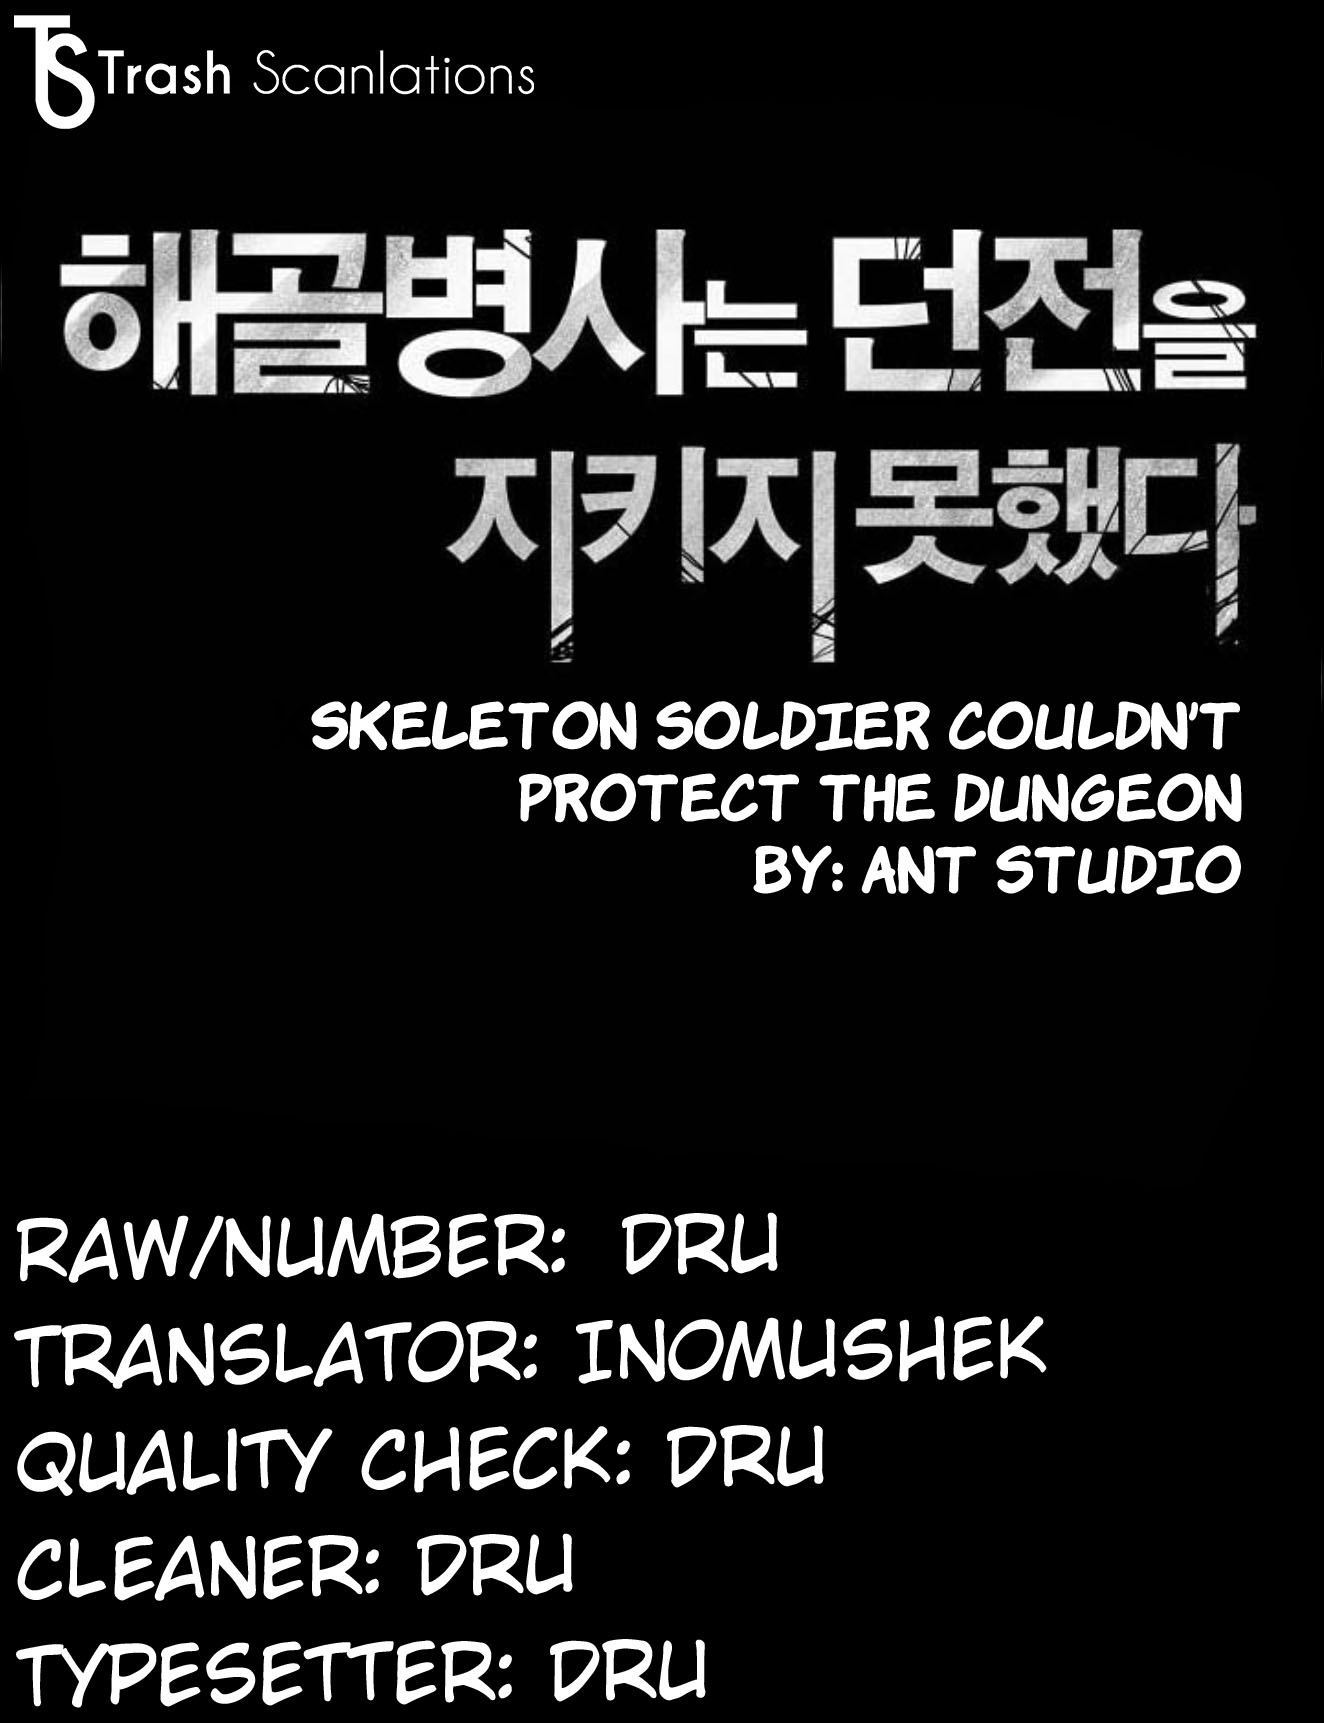 Skeleton Soldier Couldn't Protect the Dungeon - Chapter 2929 - Image 1